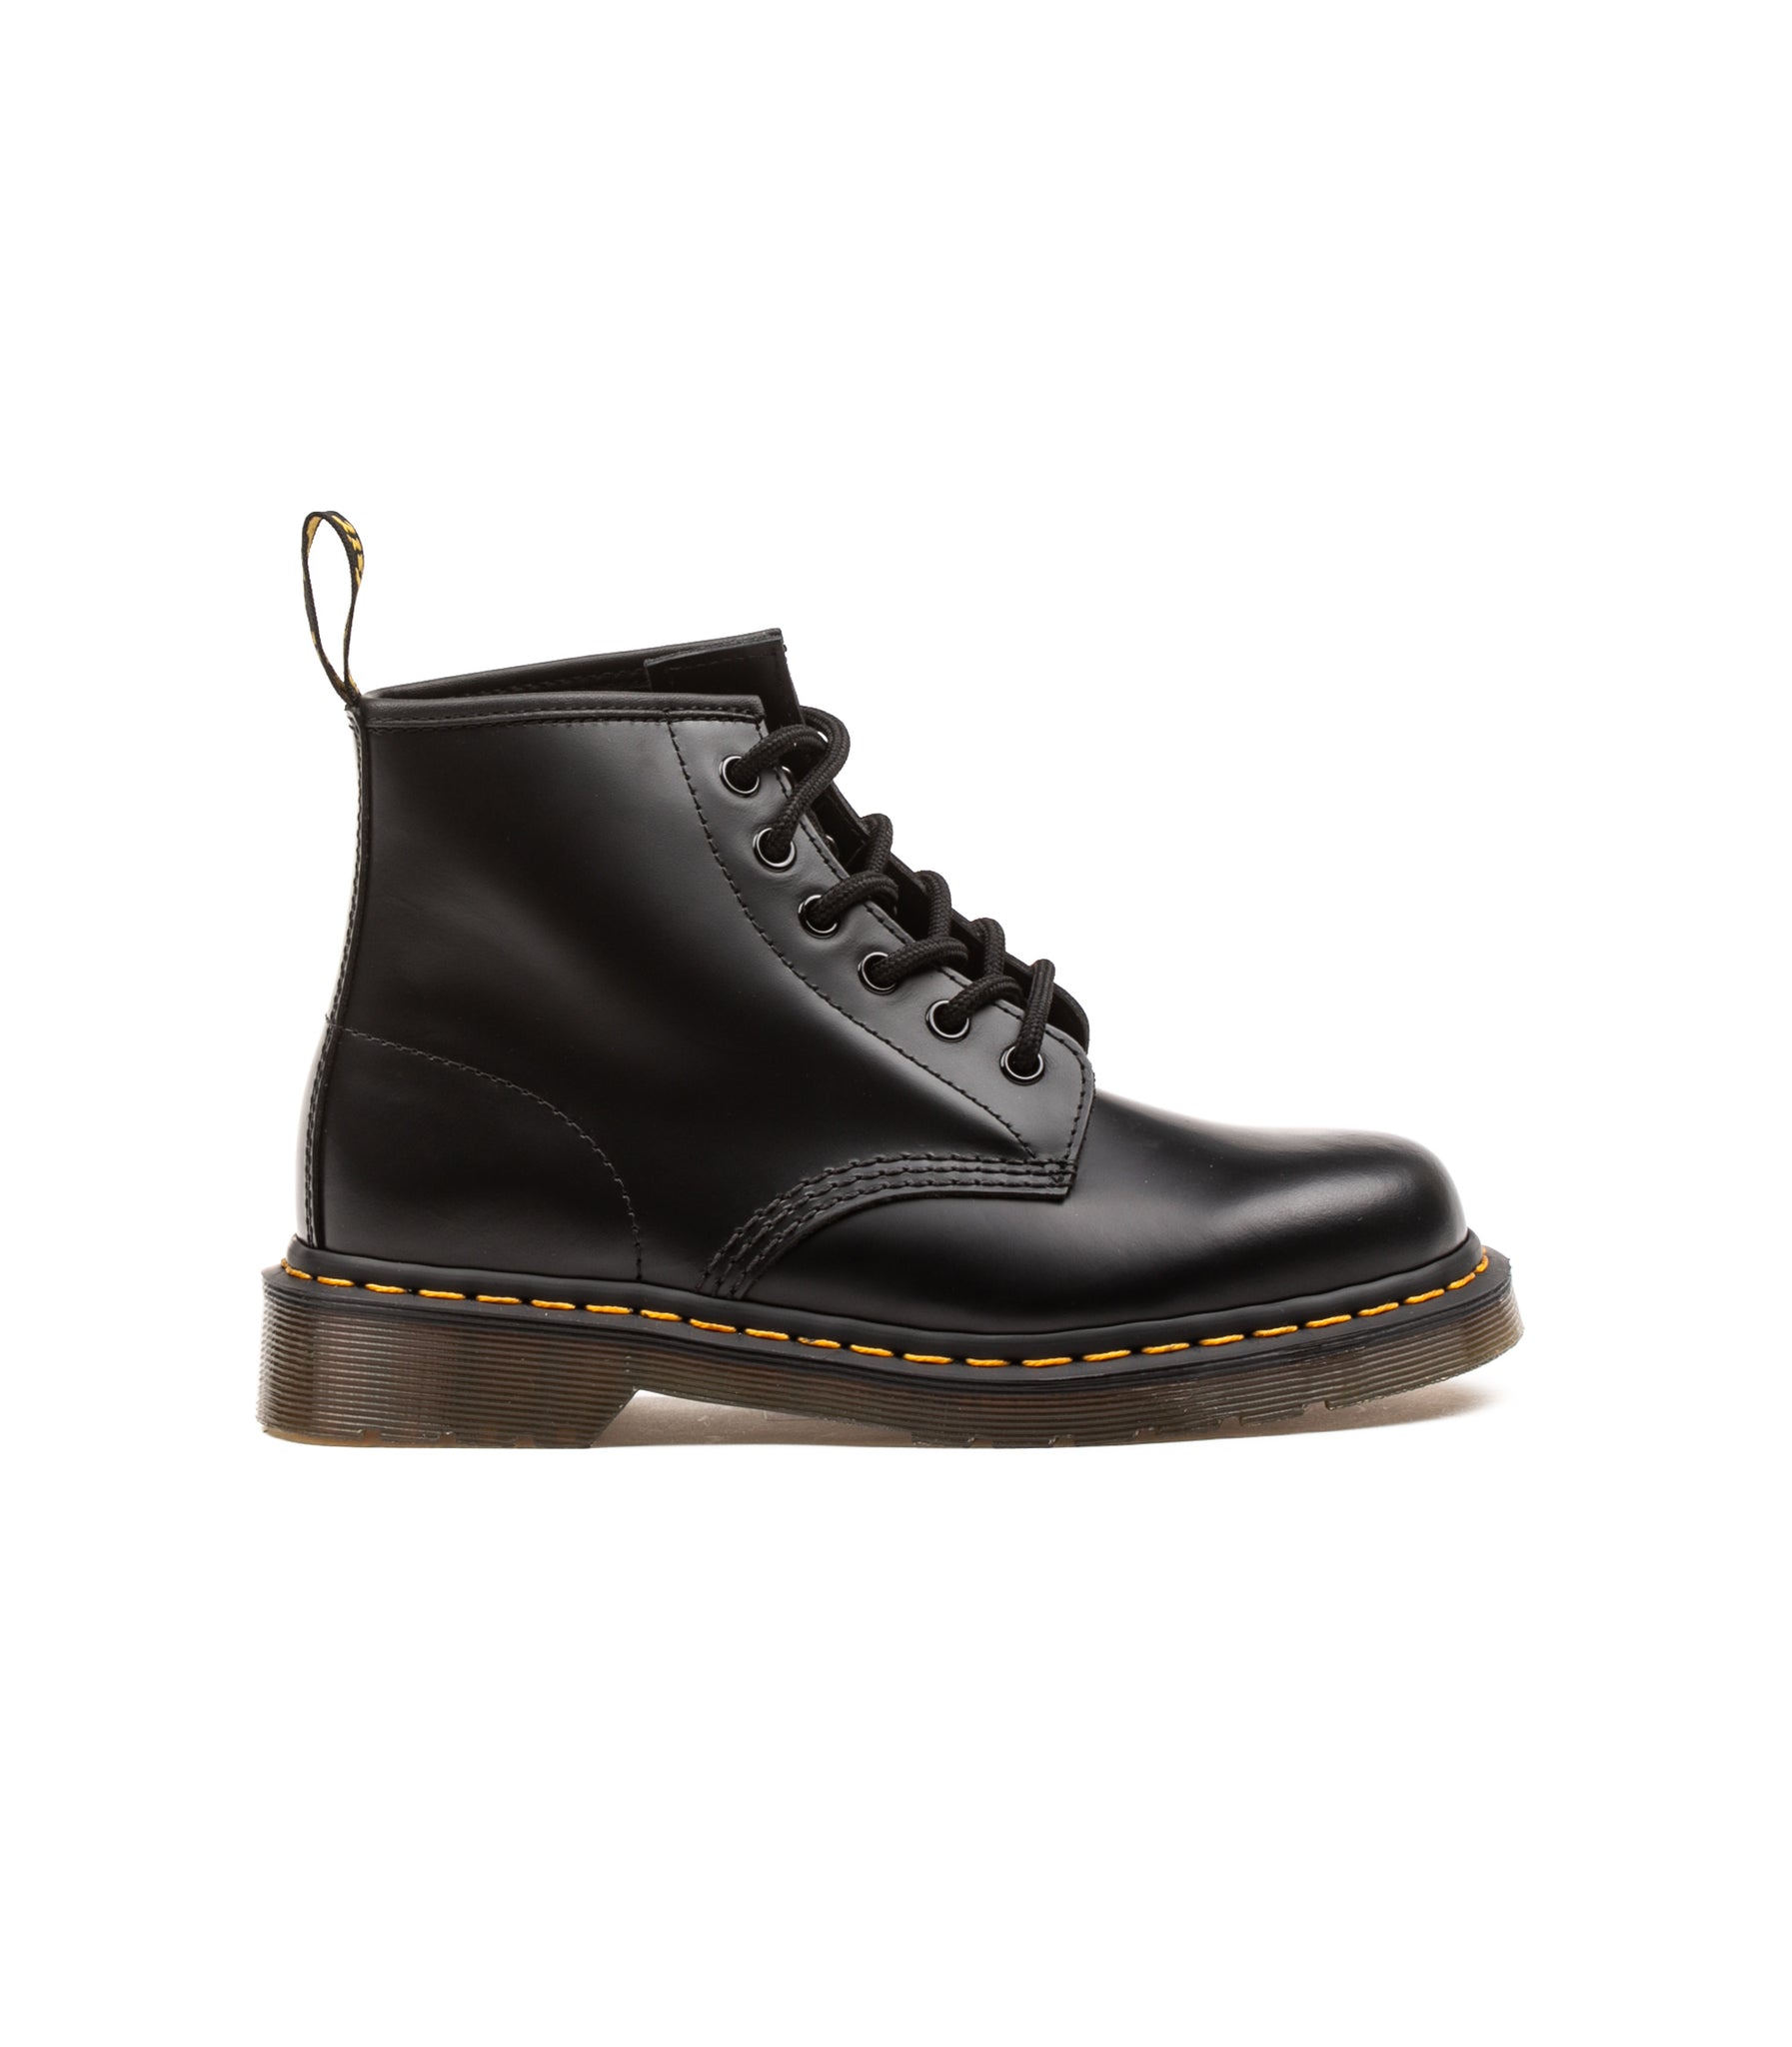 Dr. Martens 101 6 Holes Yellow Stich Smooth Black Unisex